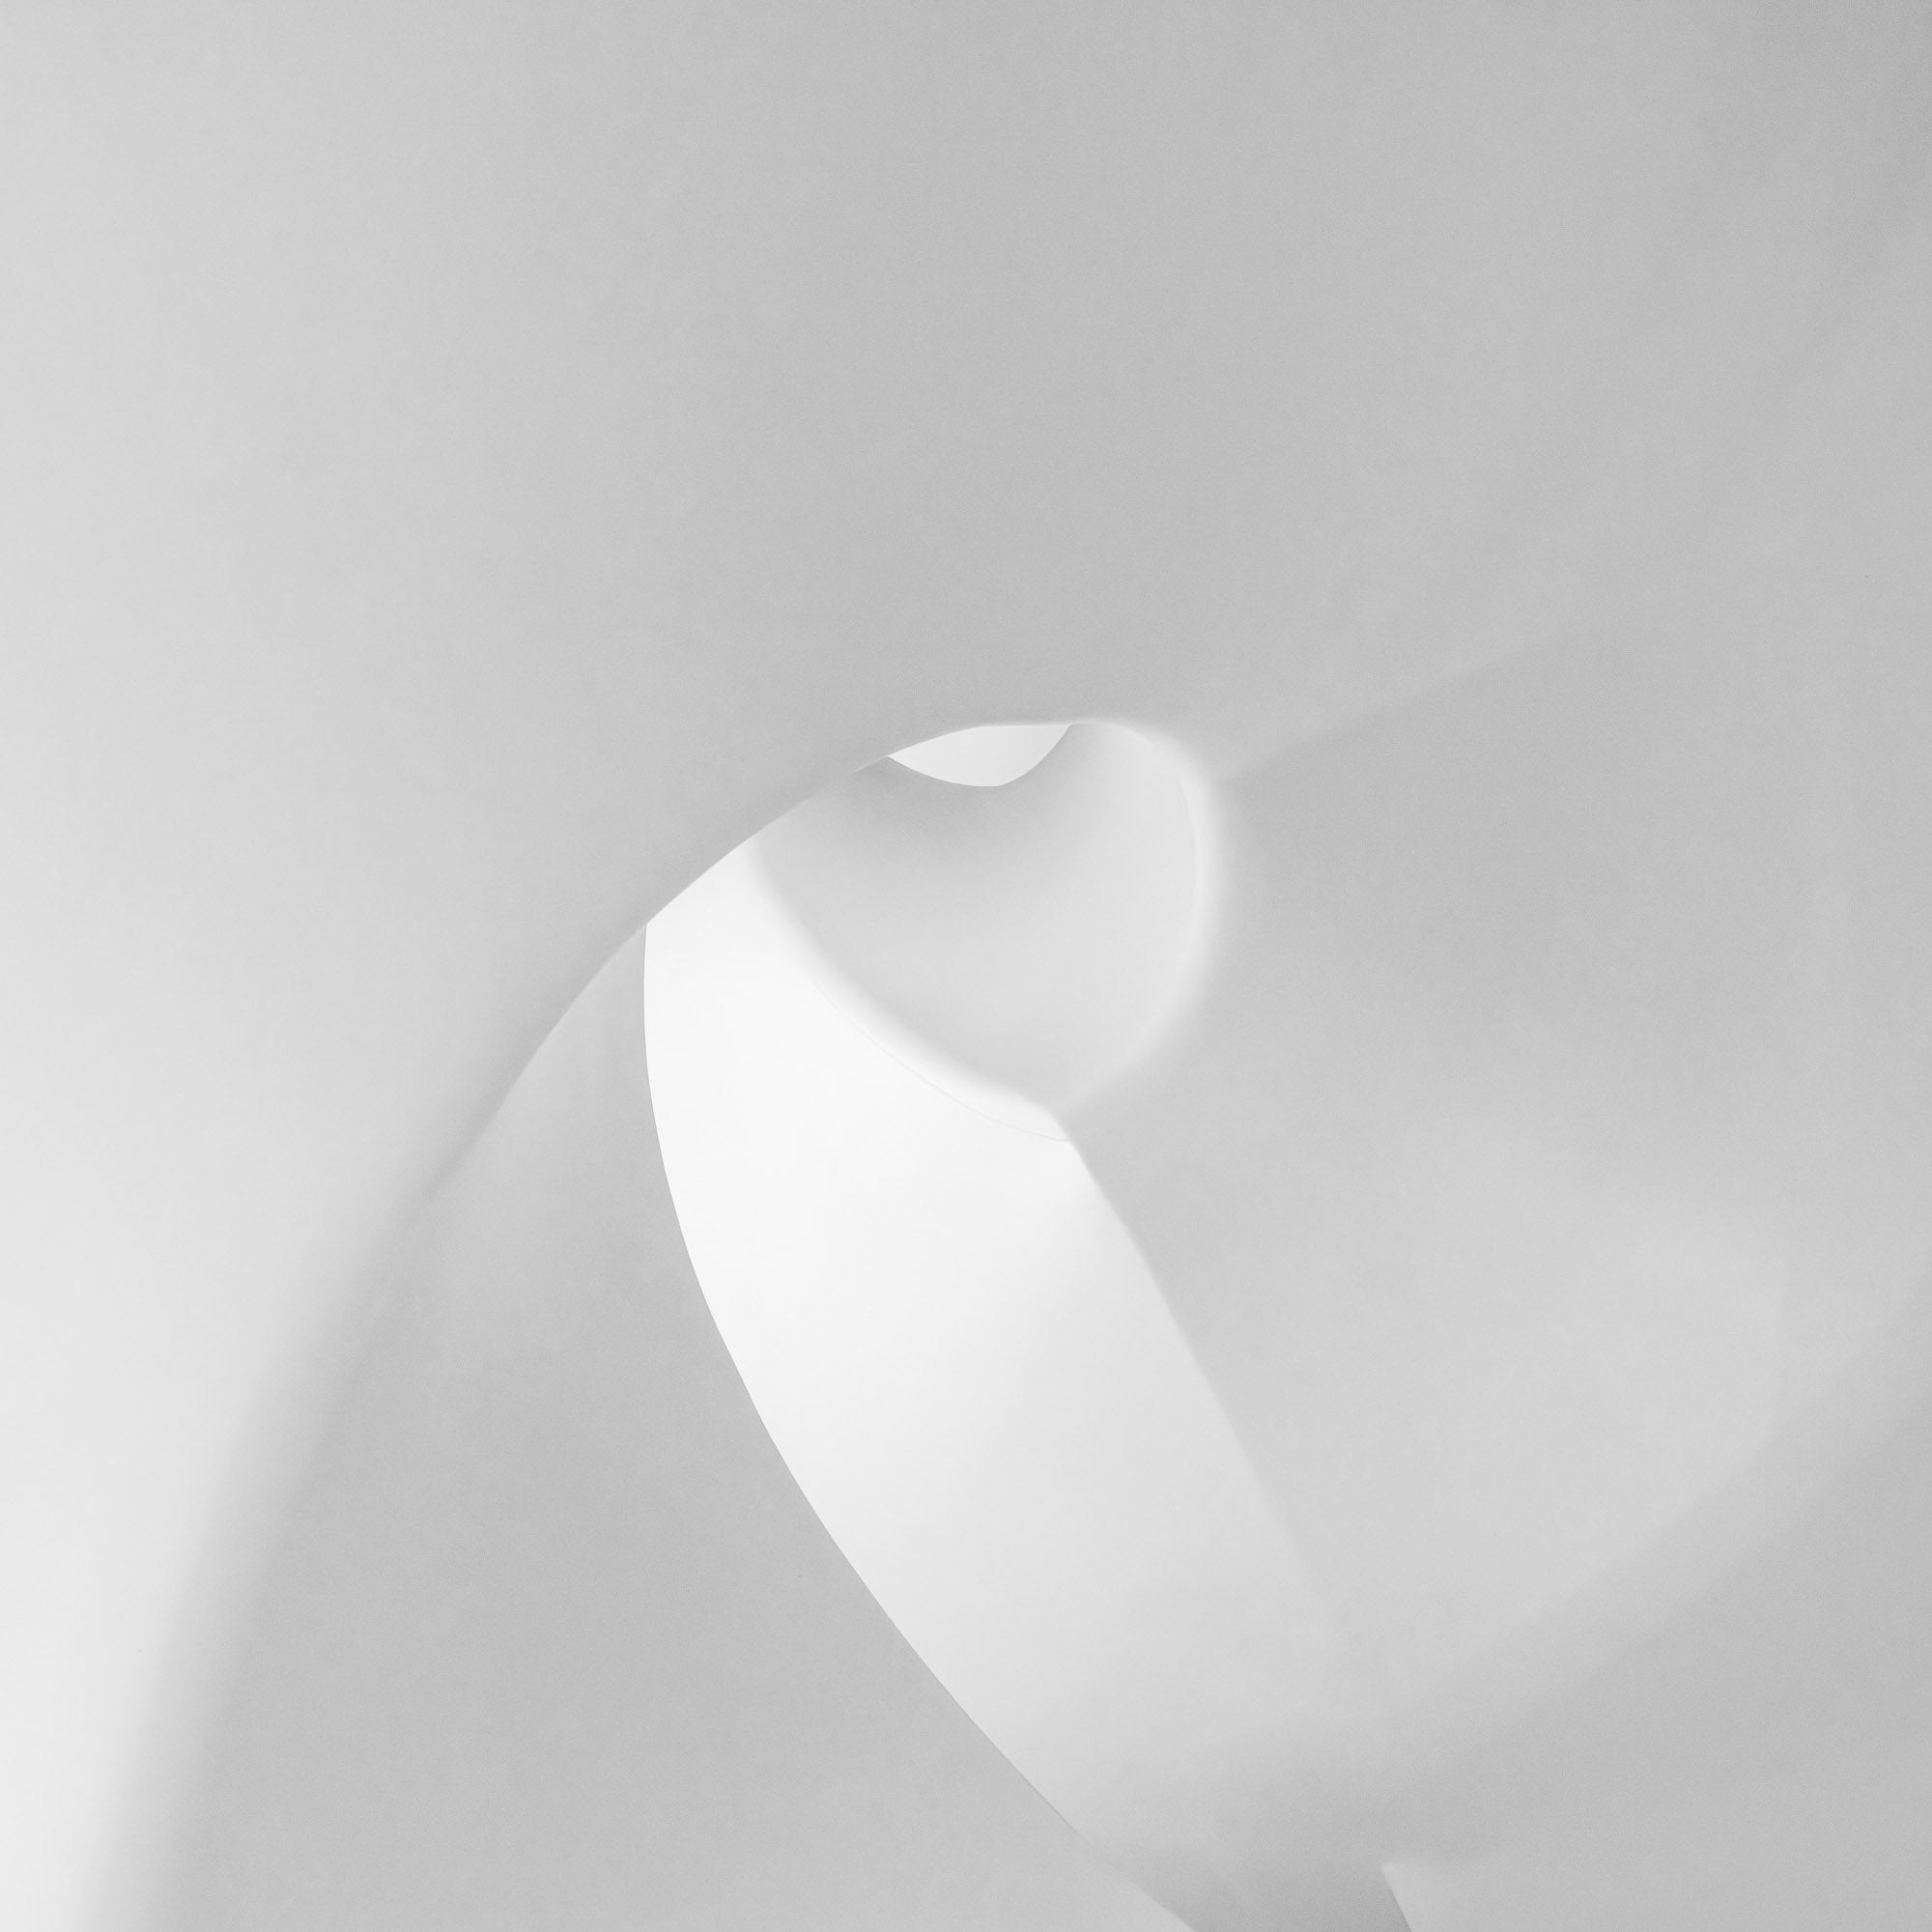 Abstract monochrome photo of soft curves and shadows within Dubai's Museum of the Future.